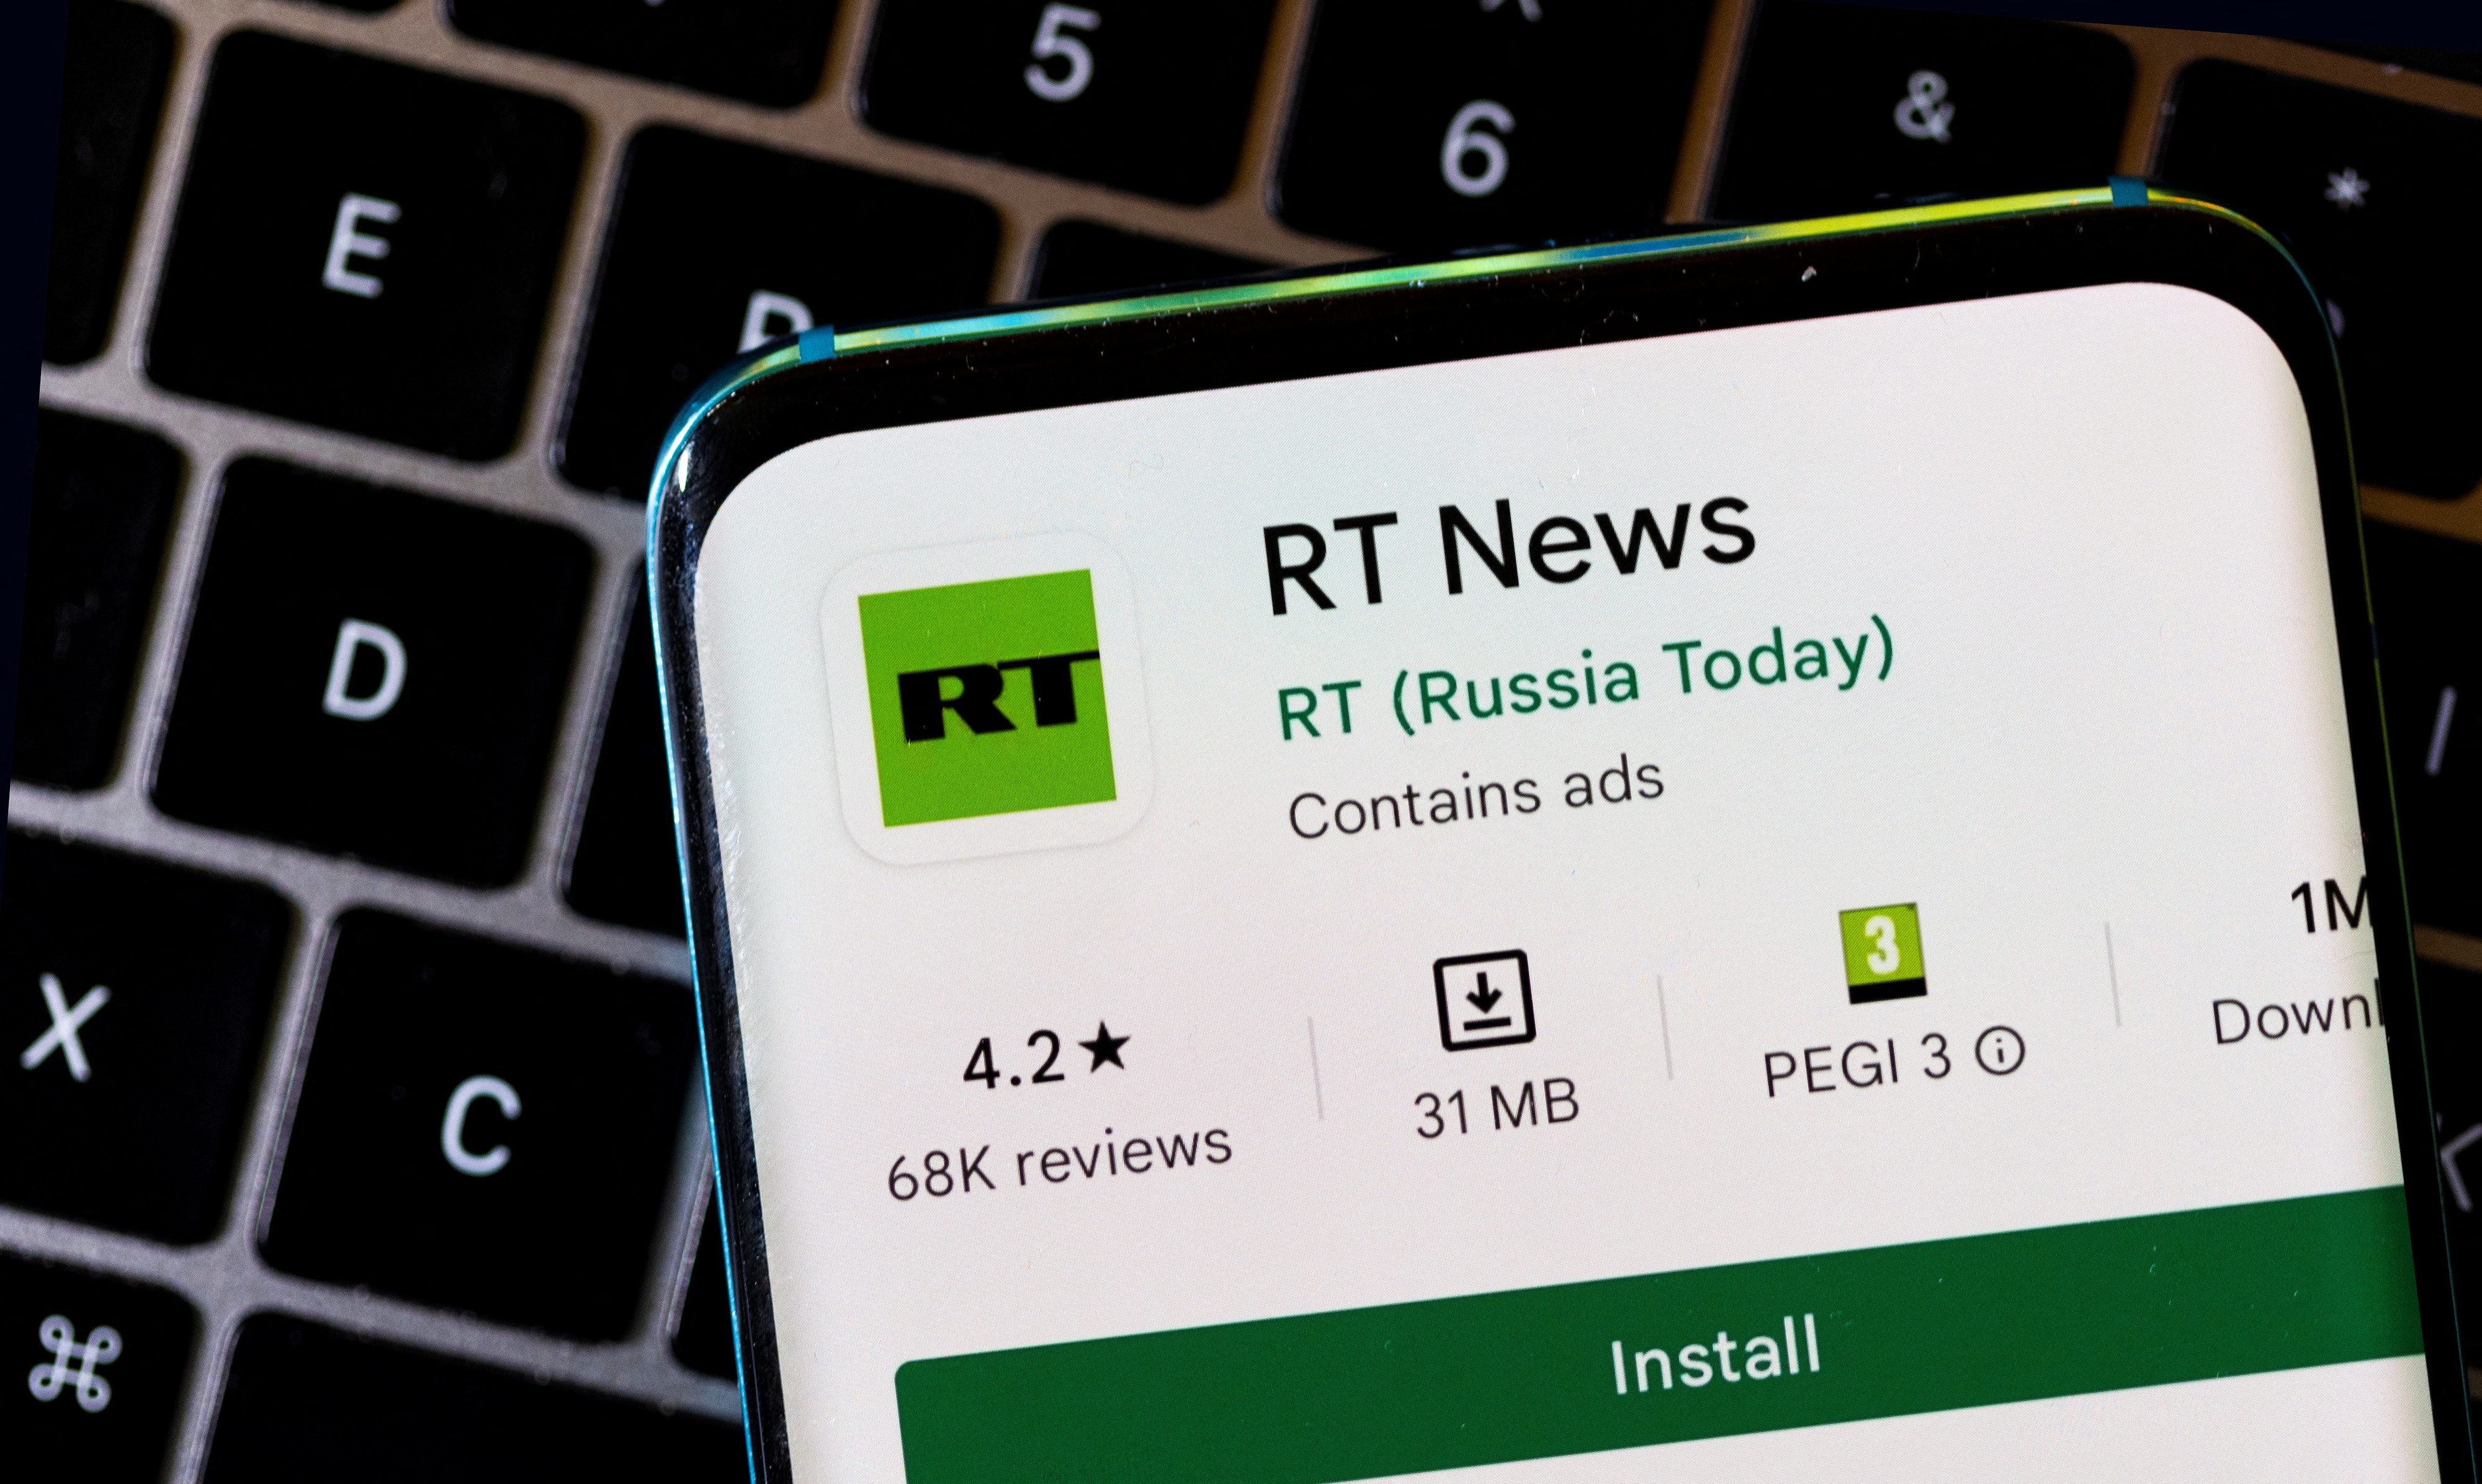 Illustration shows RT News (Russia Today) app